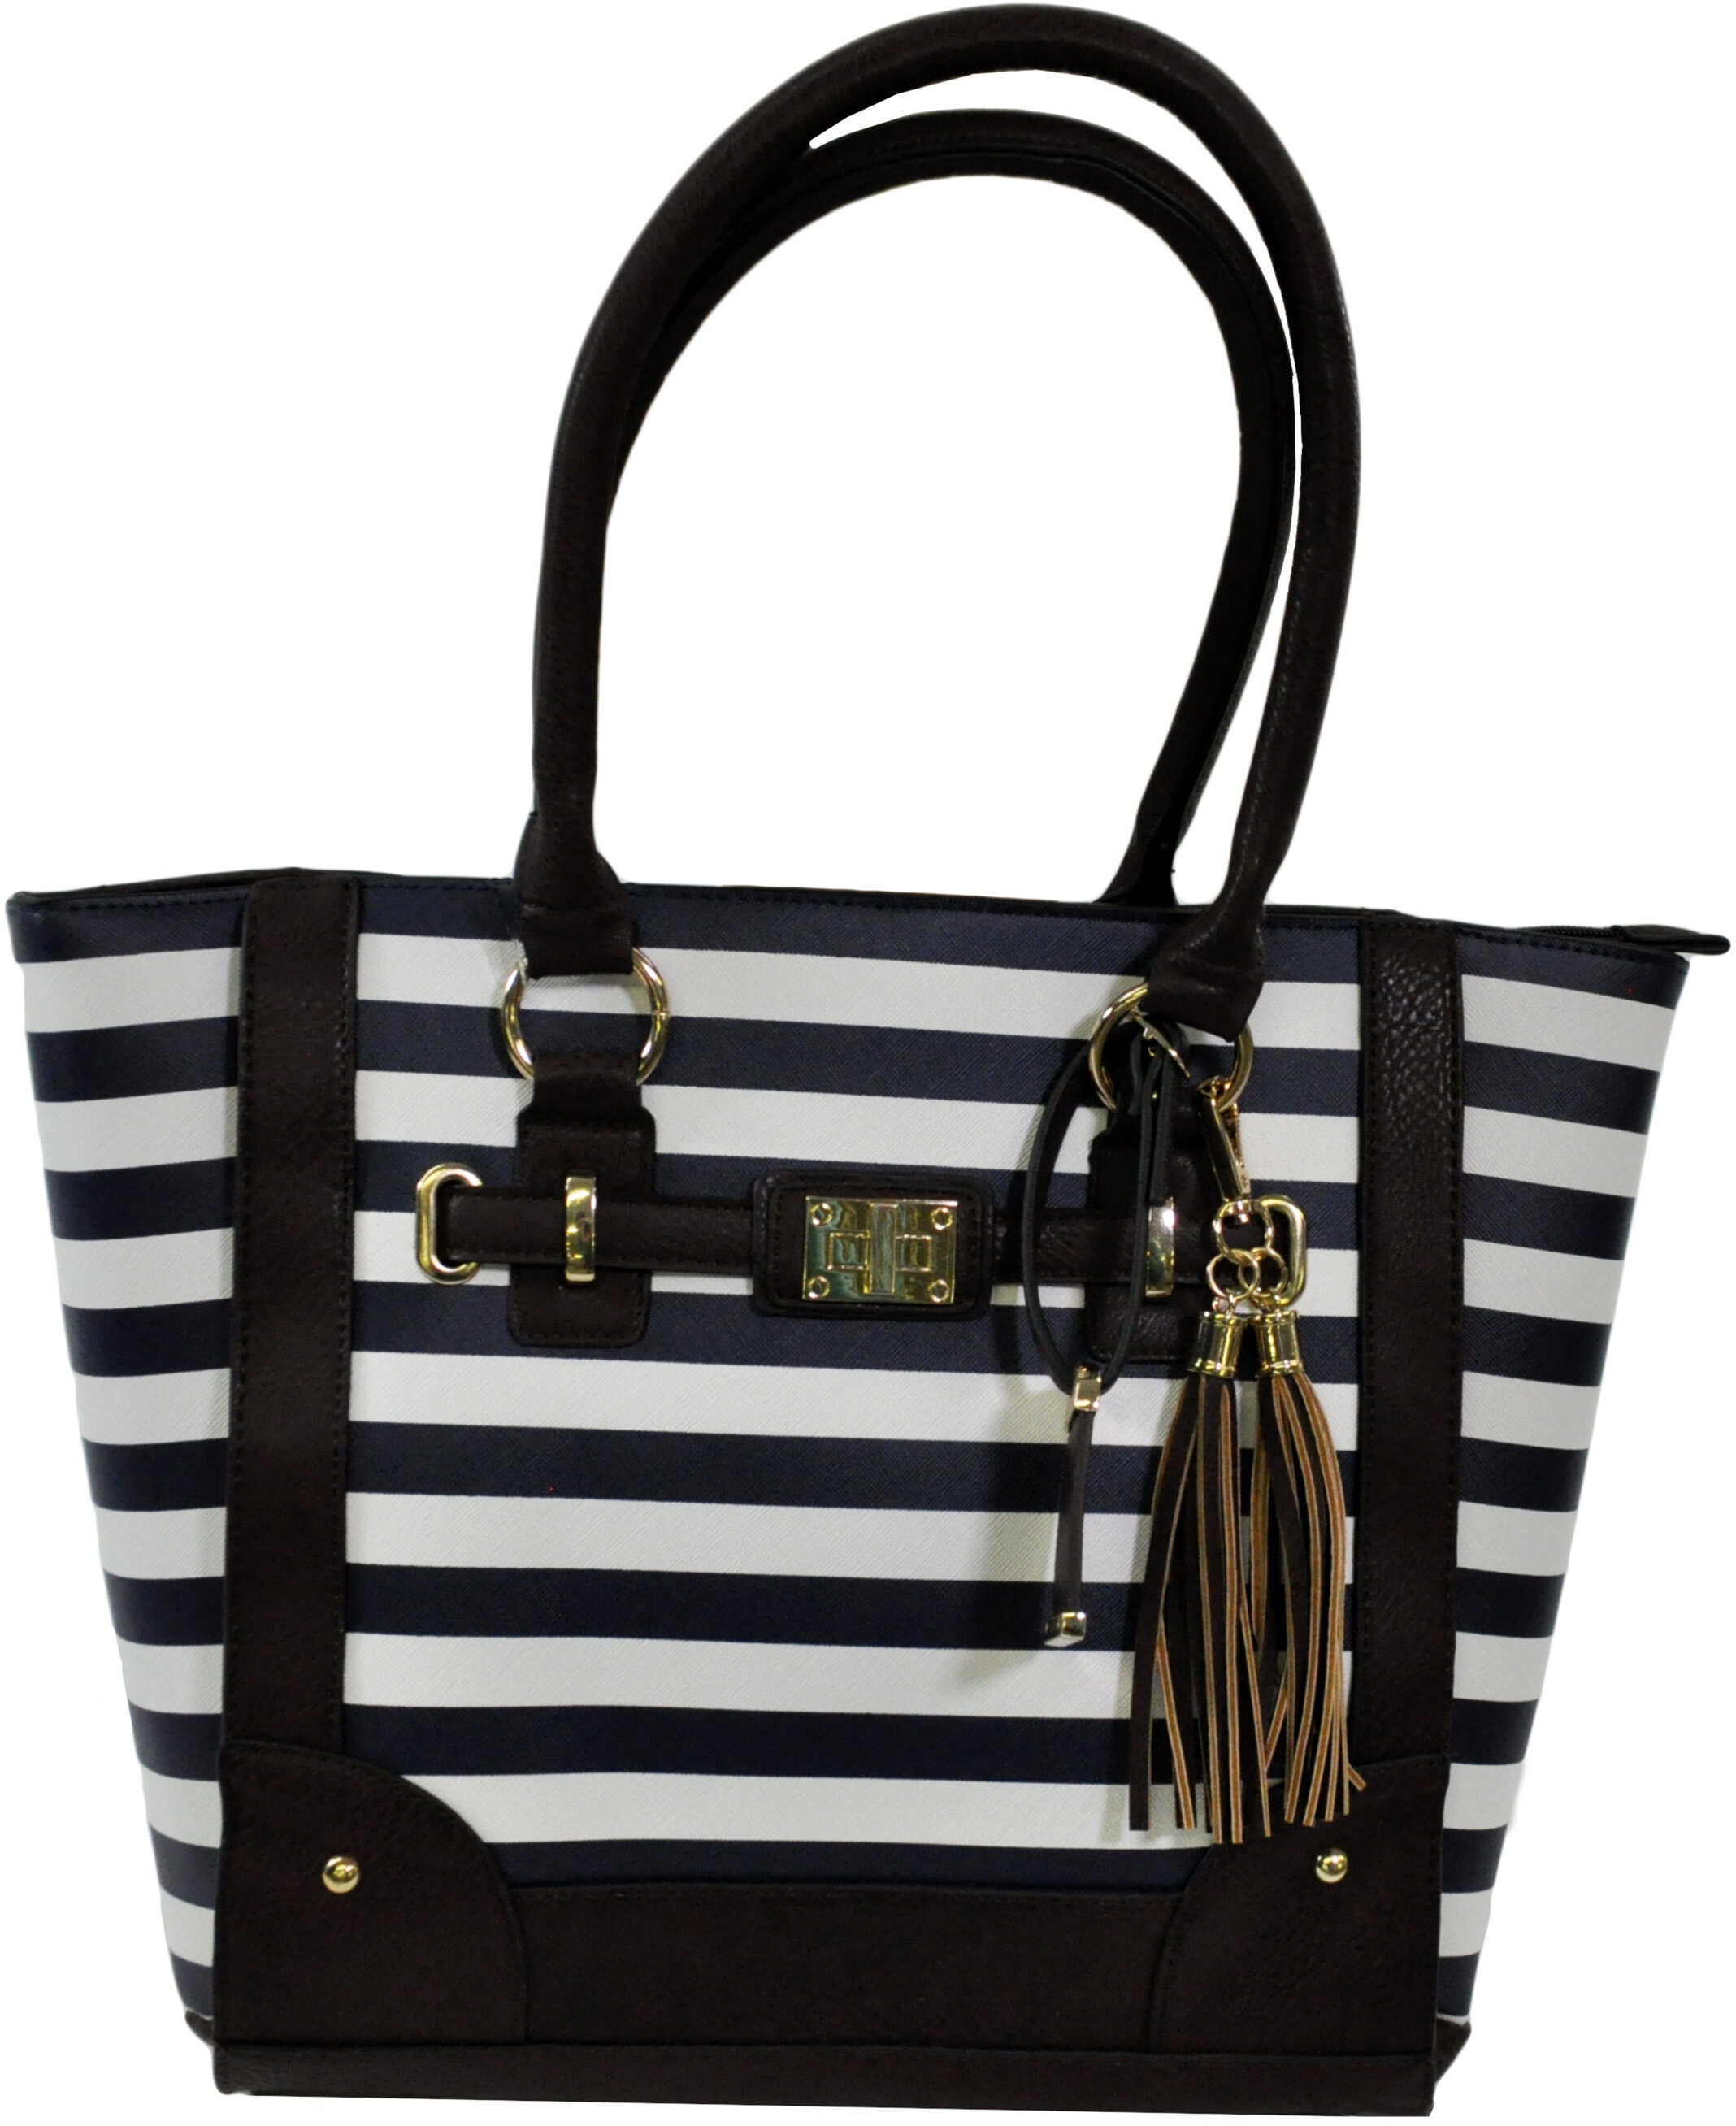 Bulldog Concealed Carrie Purse Tote Style Navy Stripe